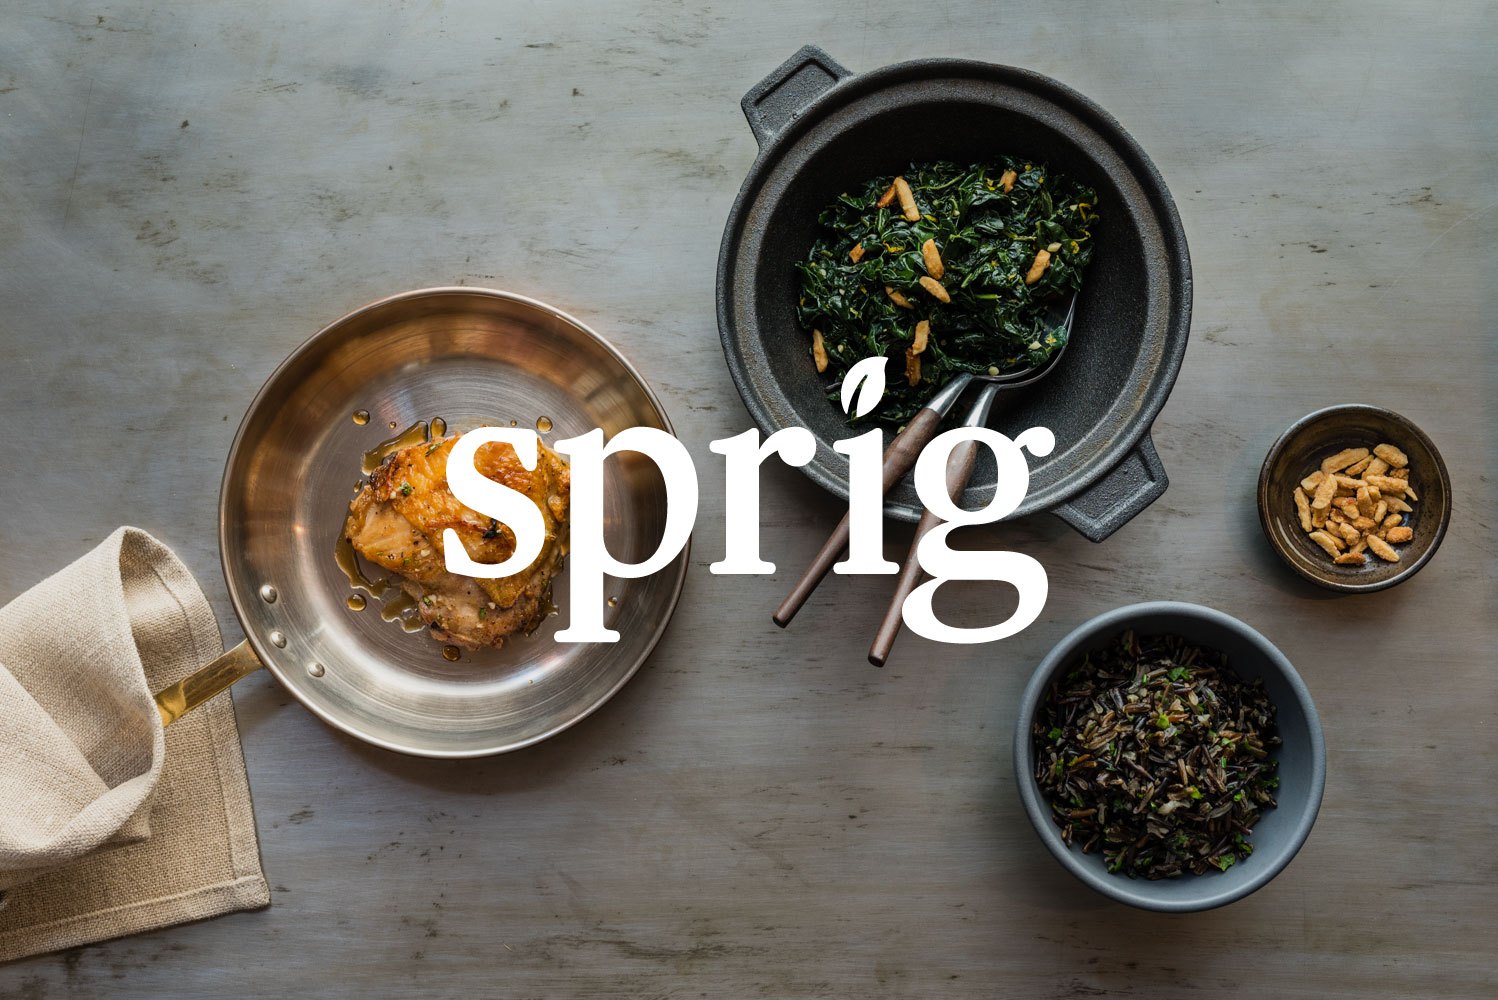 Sprig was an early success in the crowded food delivery market